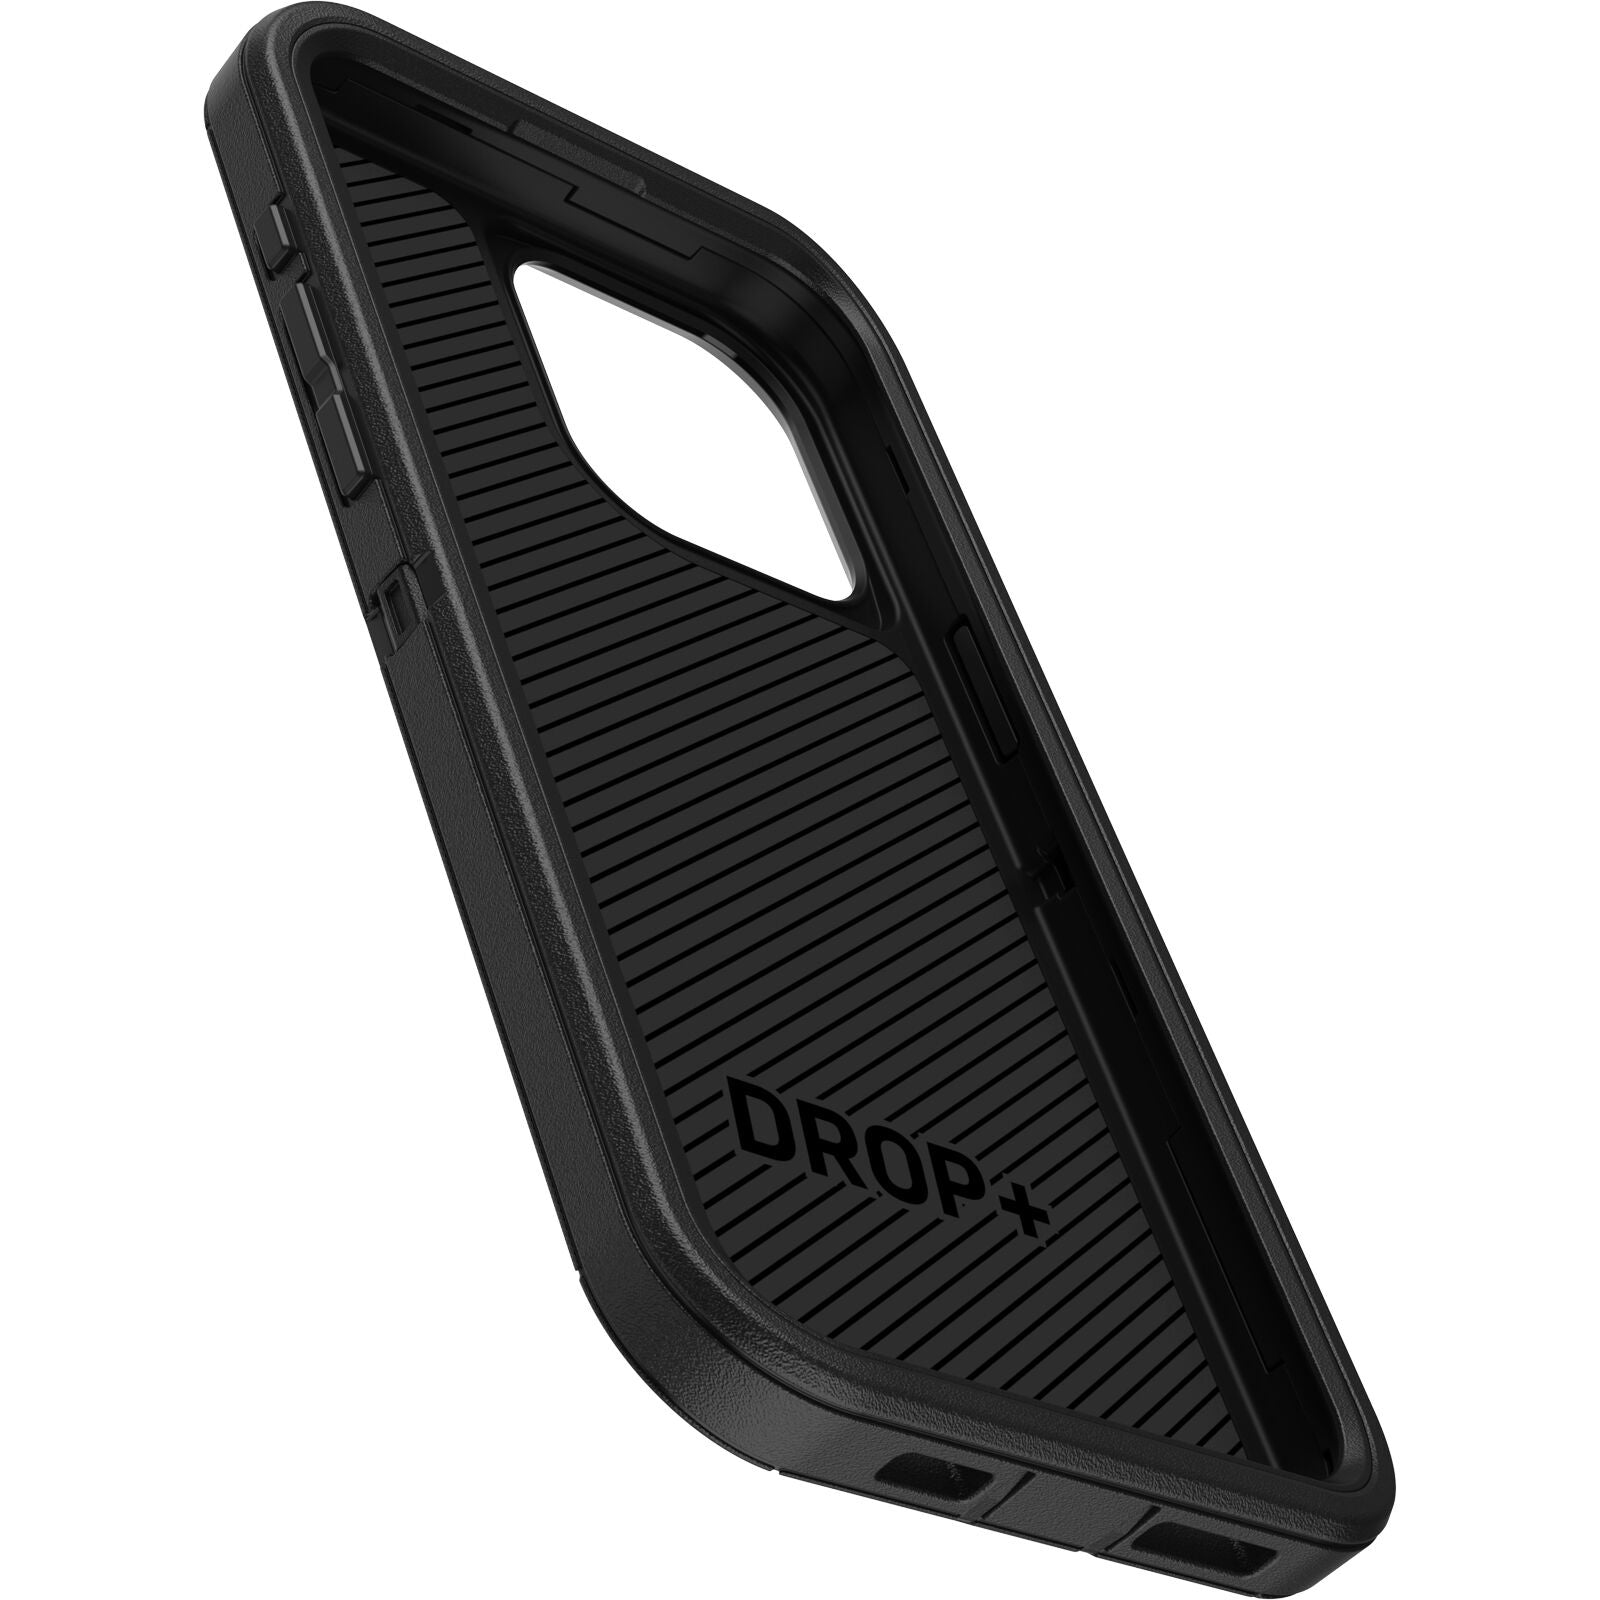 OtterBox Defender Series for iPhone (Black)